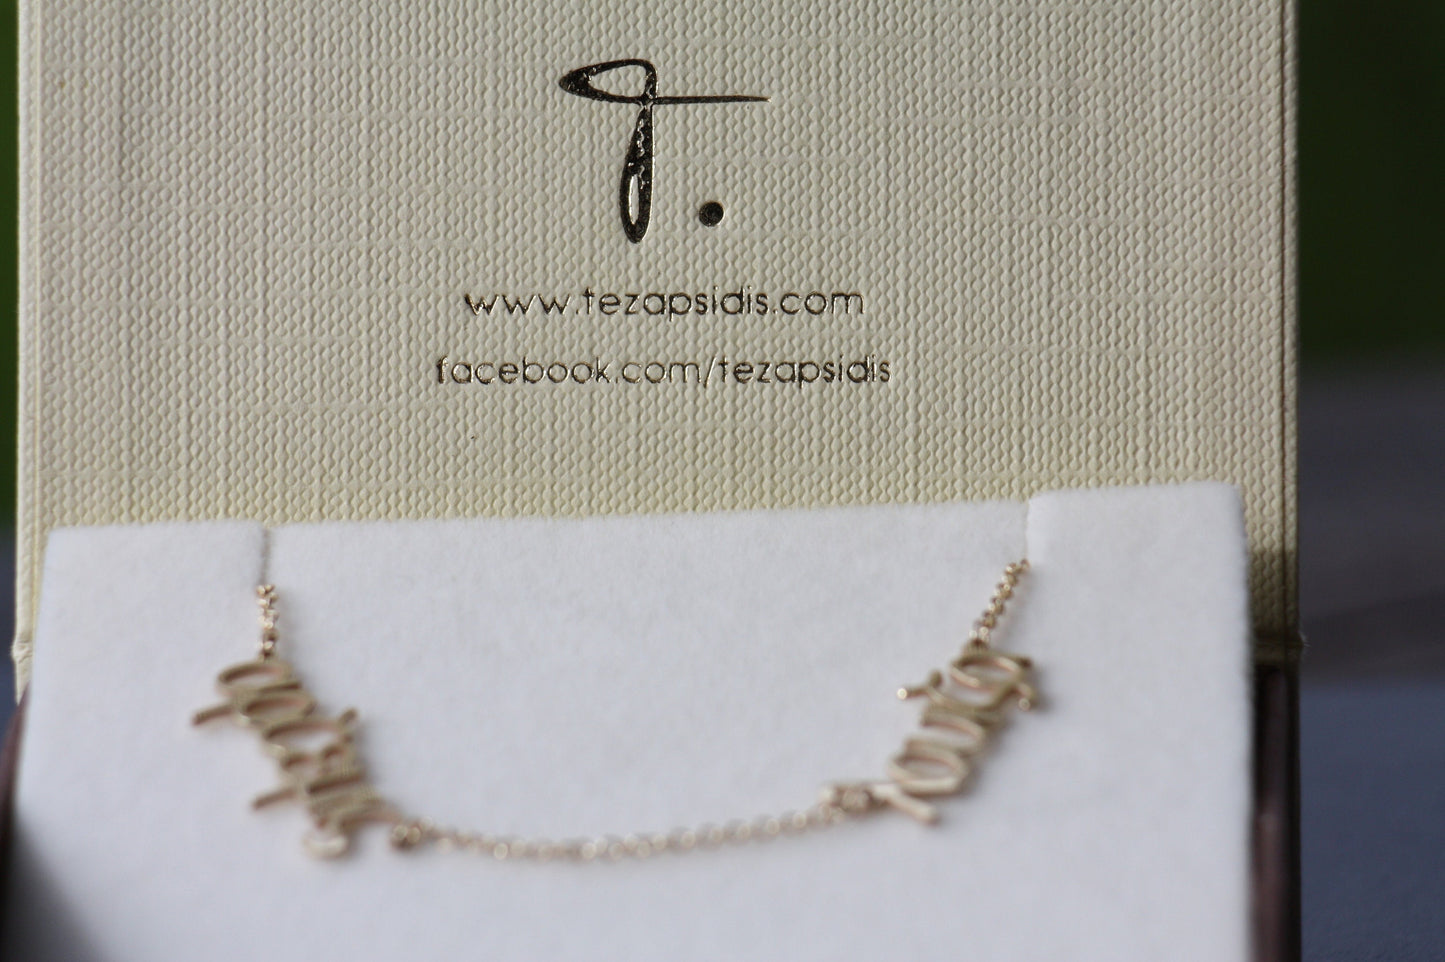 Personalized Name gold necklace